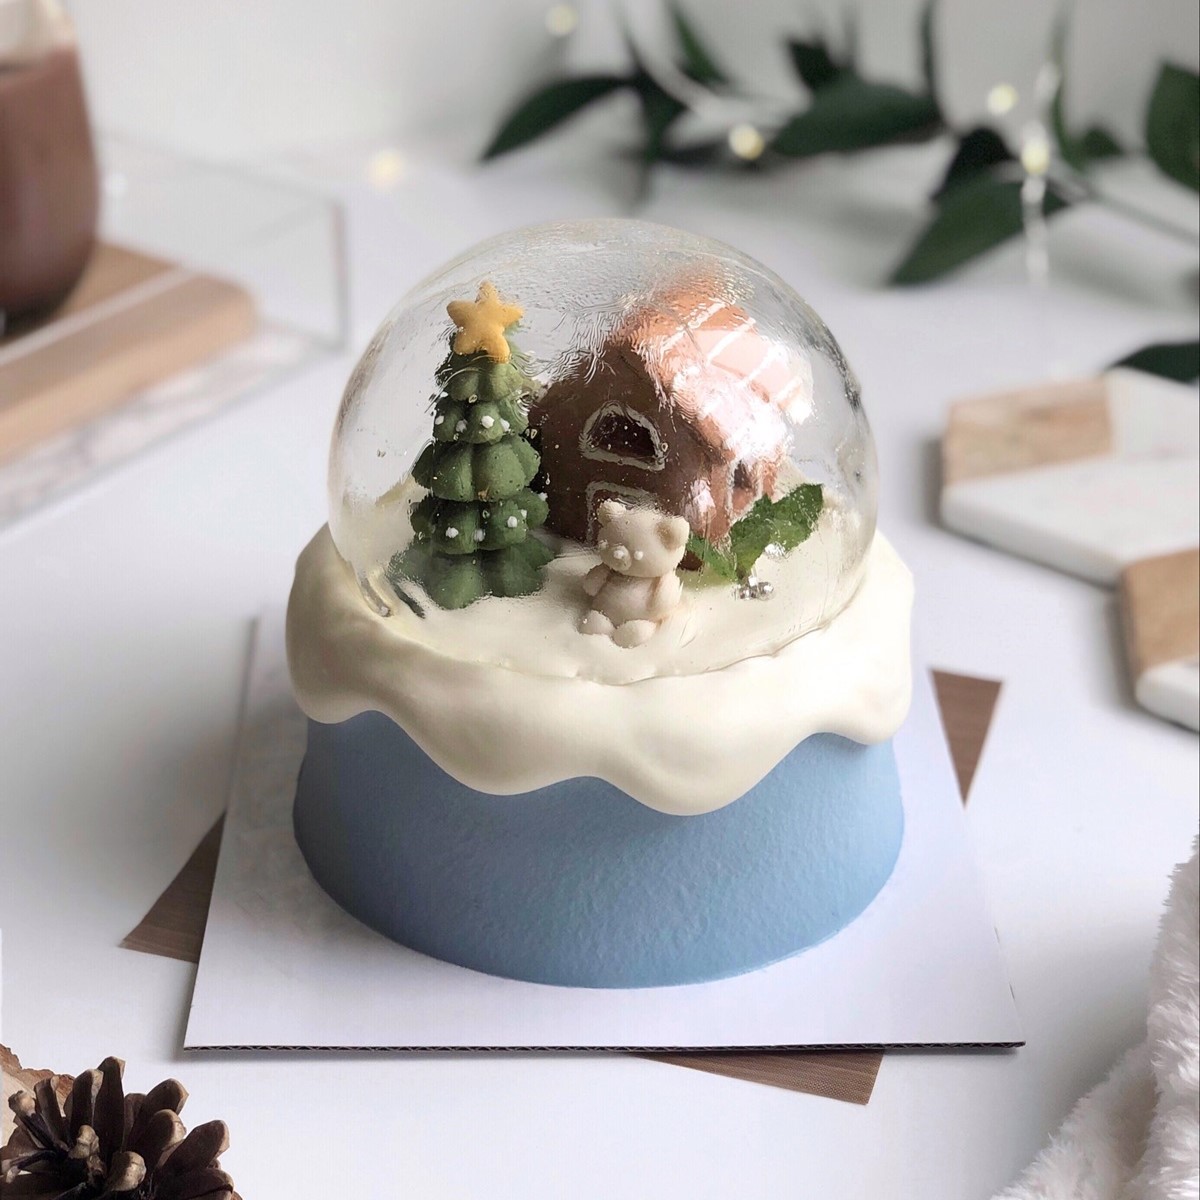 Here's The Completed Snow Globe Cake. A White Chocolate Chiffon Fresh Cream Drip Cake, Butter Cookie Decorations, And A Crystal Sugar Dome That Took Years Off My Life. Merry Christmas